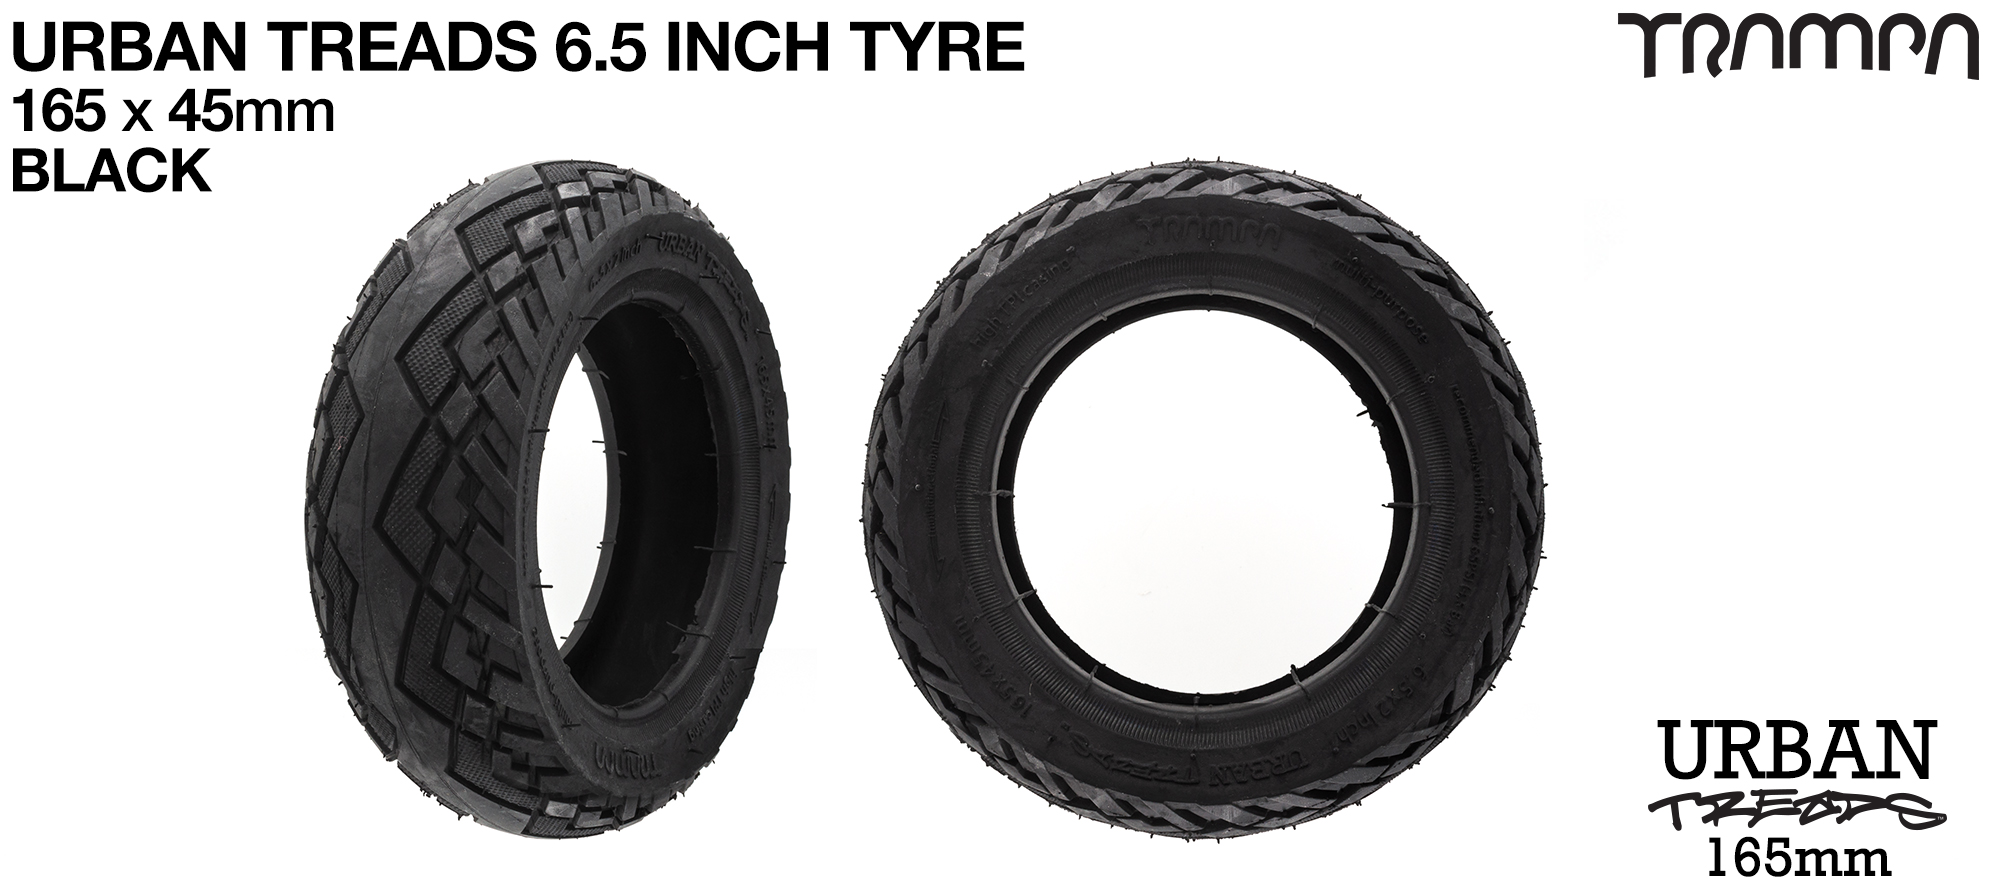 URBAN TREADS 6 Inch Tyre measures 3.75x 1.75x 6.5 Inch or 165x 45mm with 3.75 inch Rim & fits all 3.75 inch Hubs - BLACK